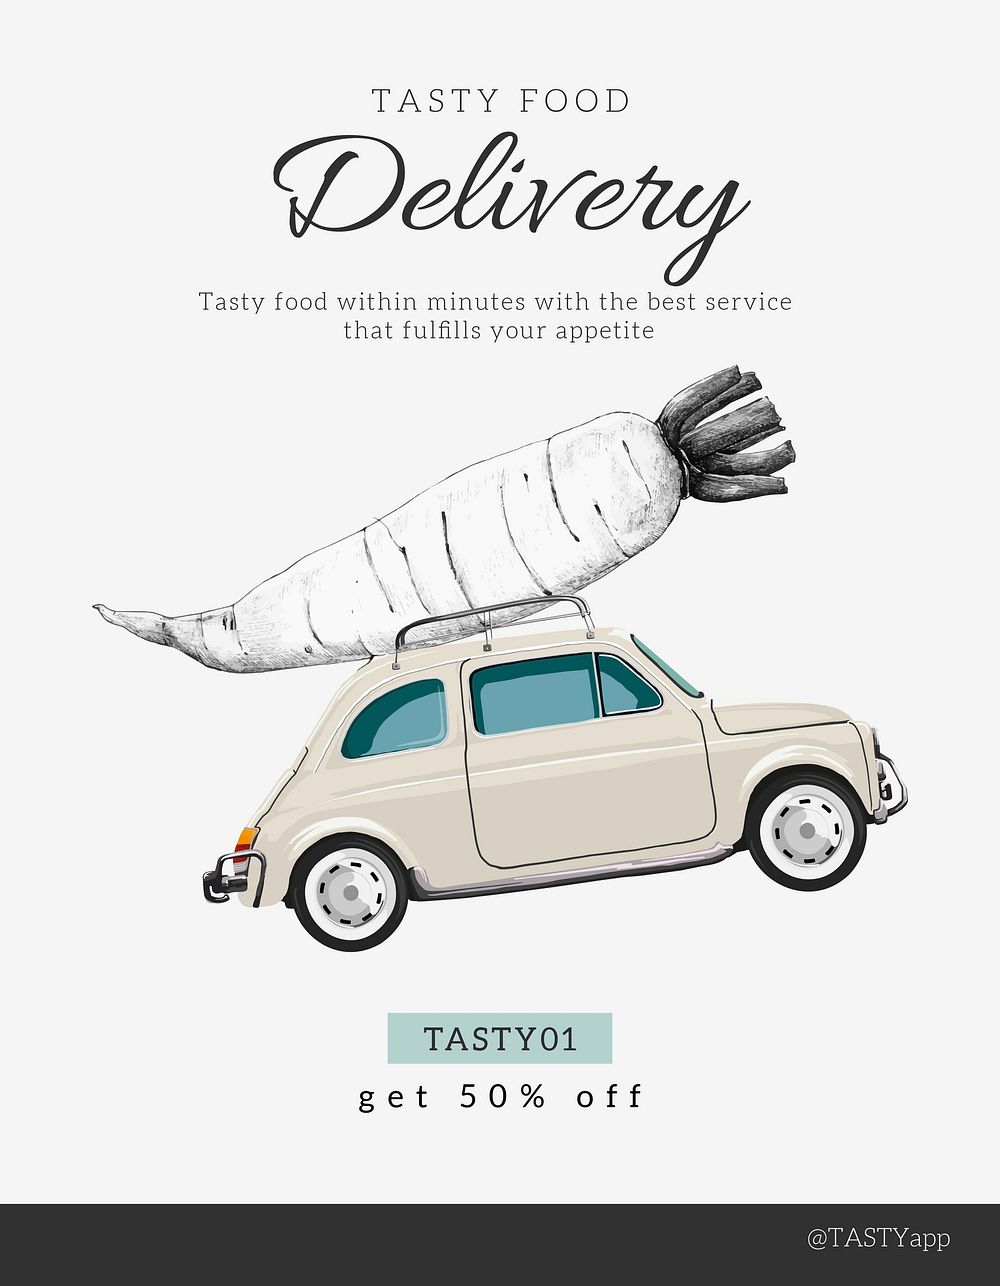 Food delivery flyer template, small business ad psd 